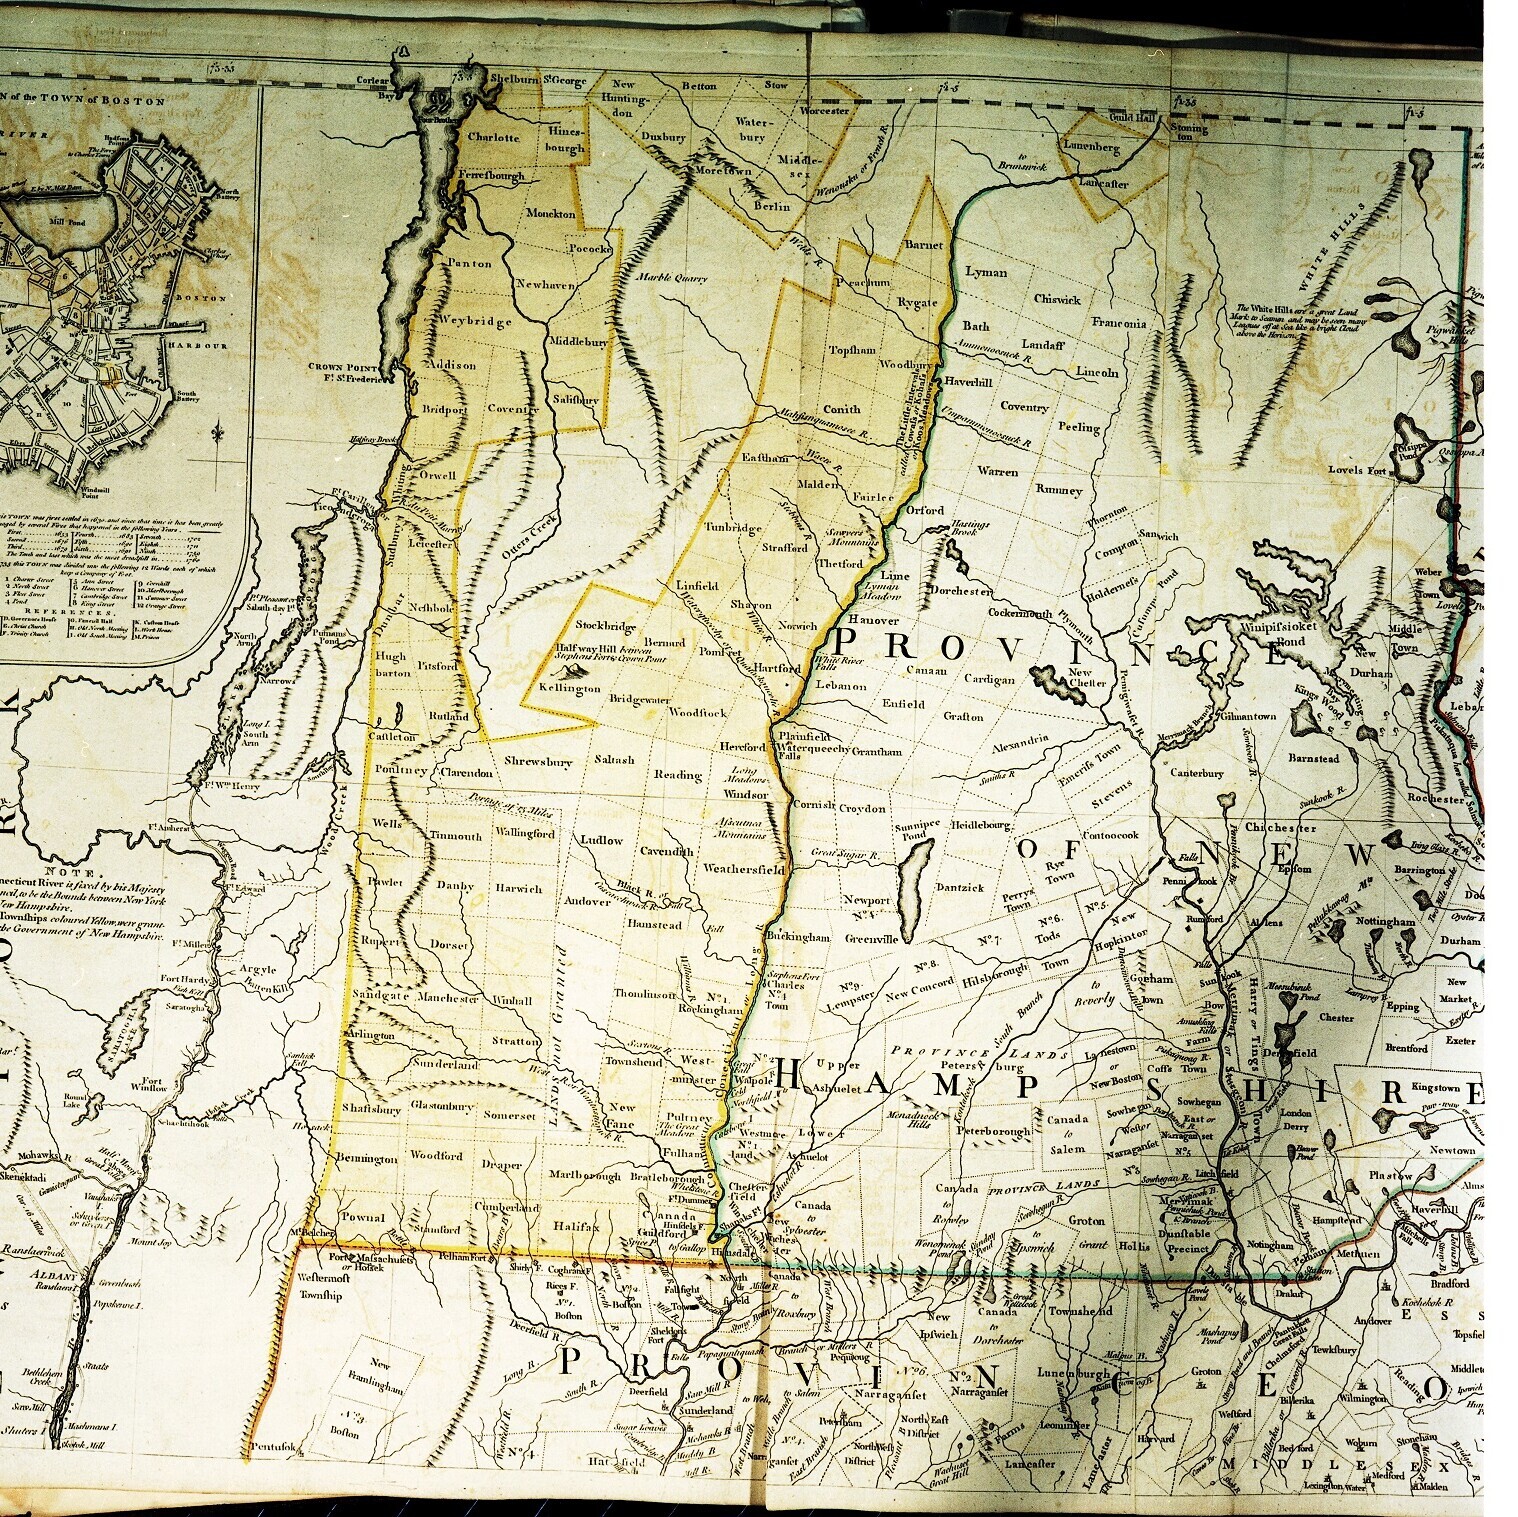 section of map of Vermont featuring New Hampshire Grants